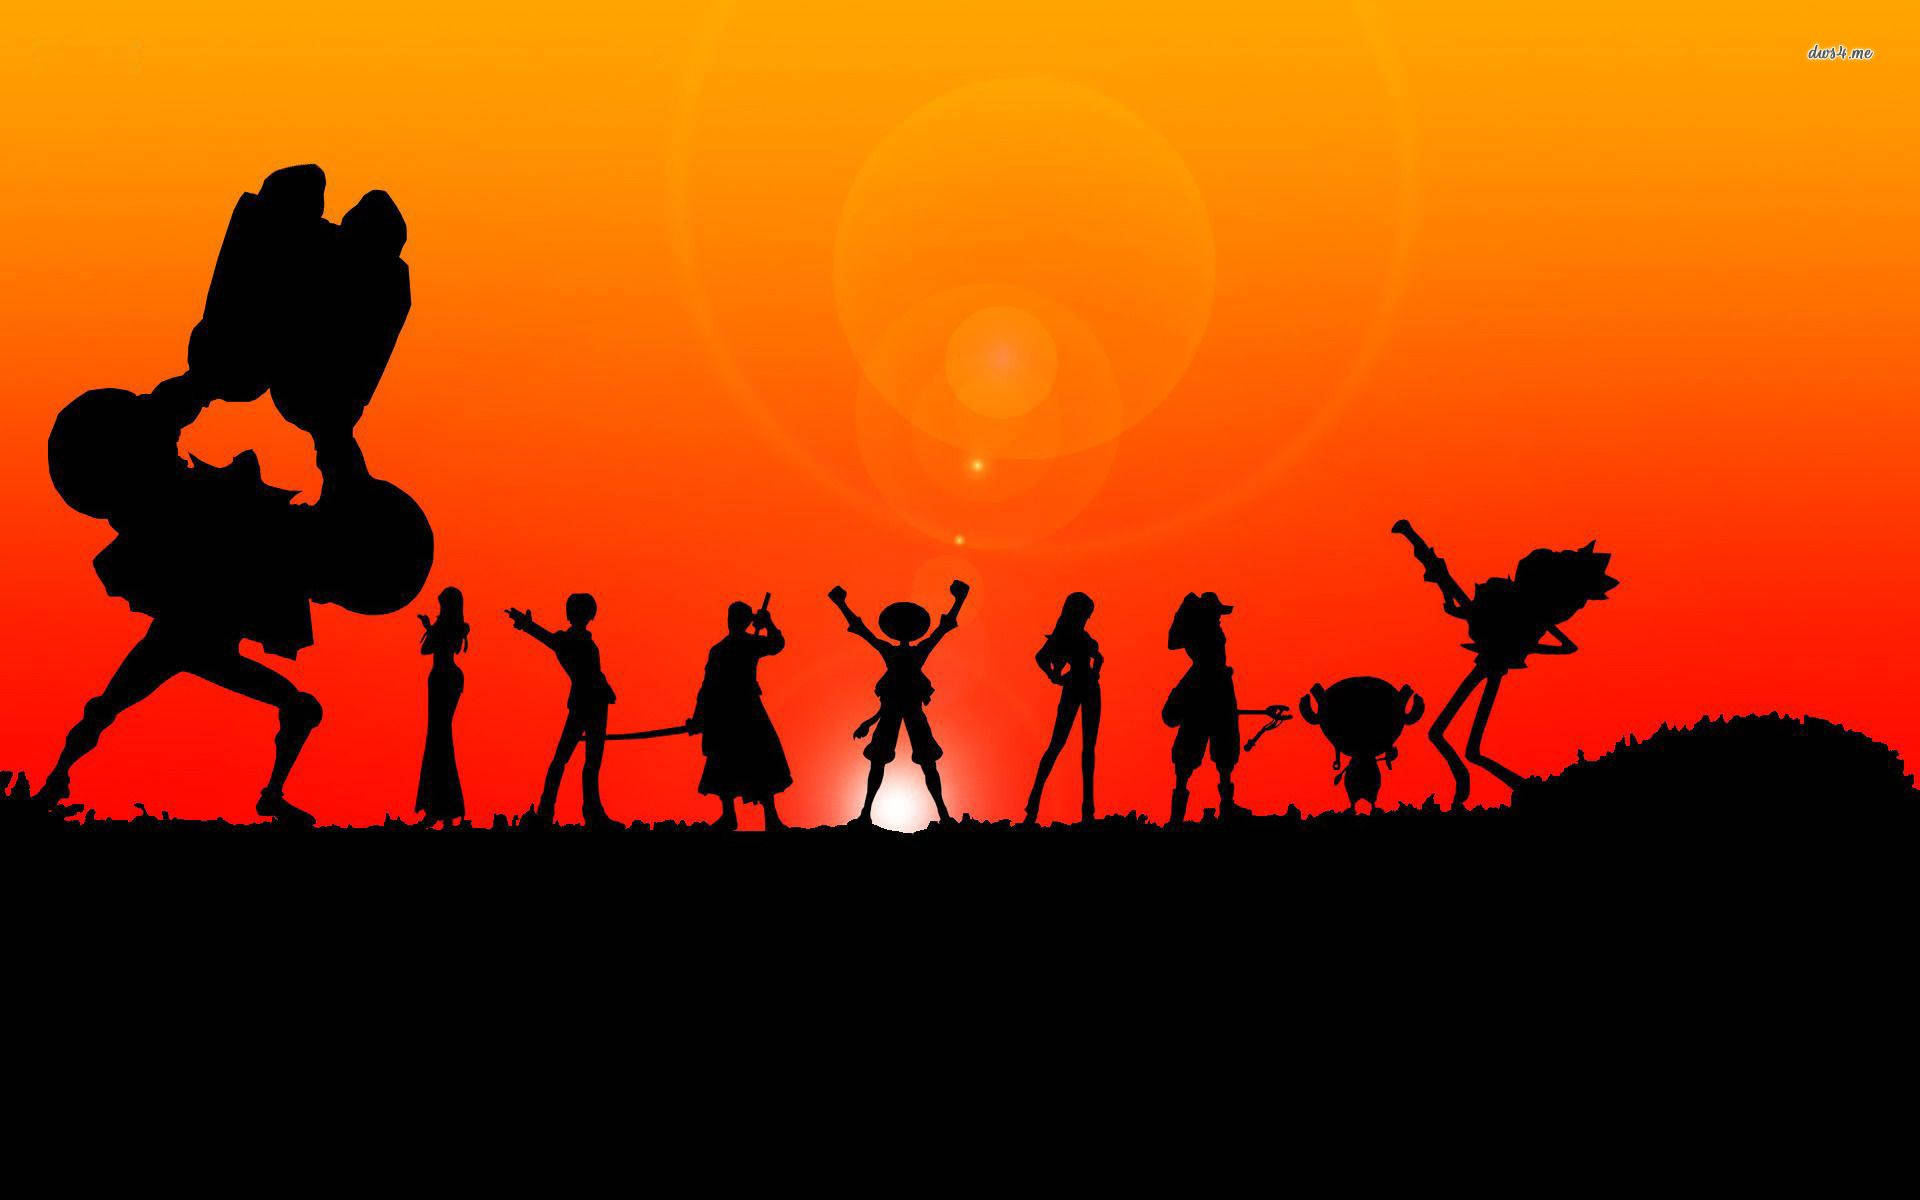 One Piece Characters Silhouette In Sunset Background